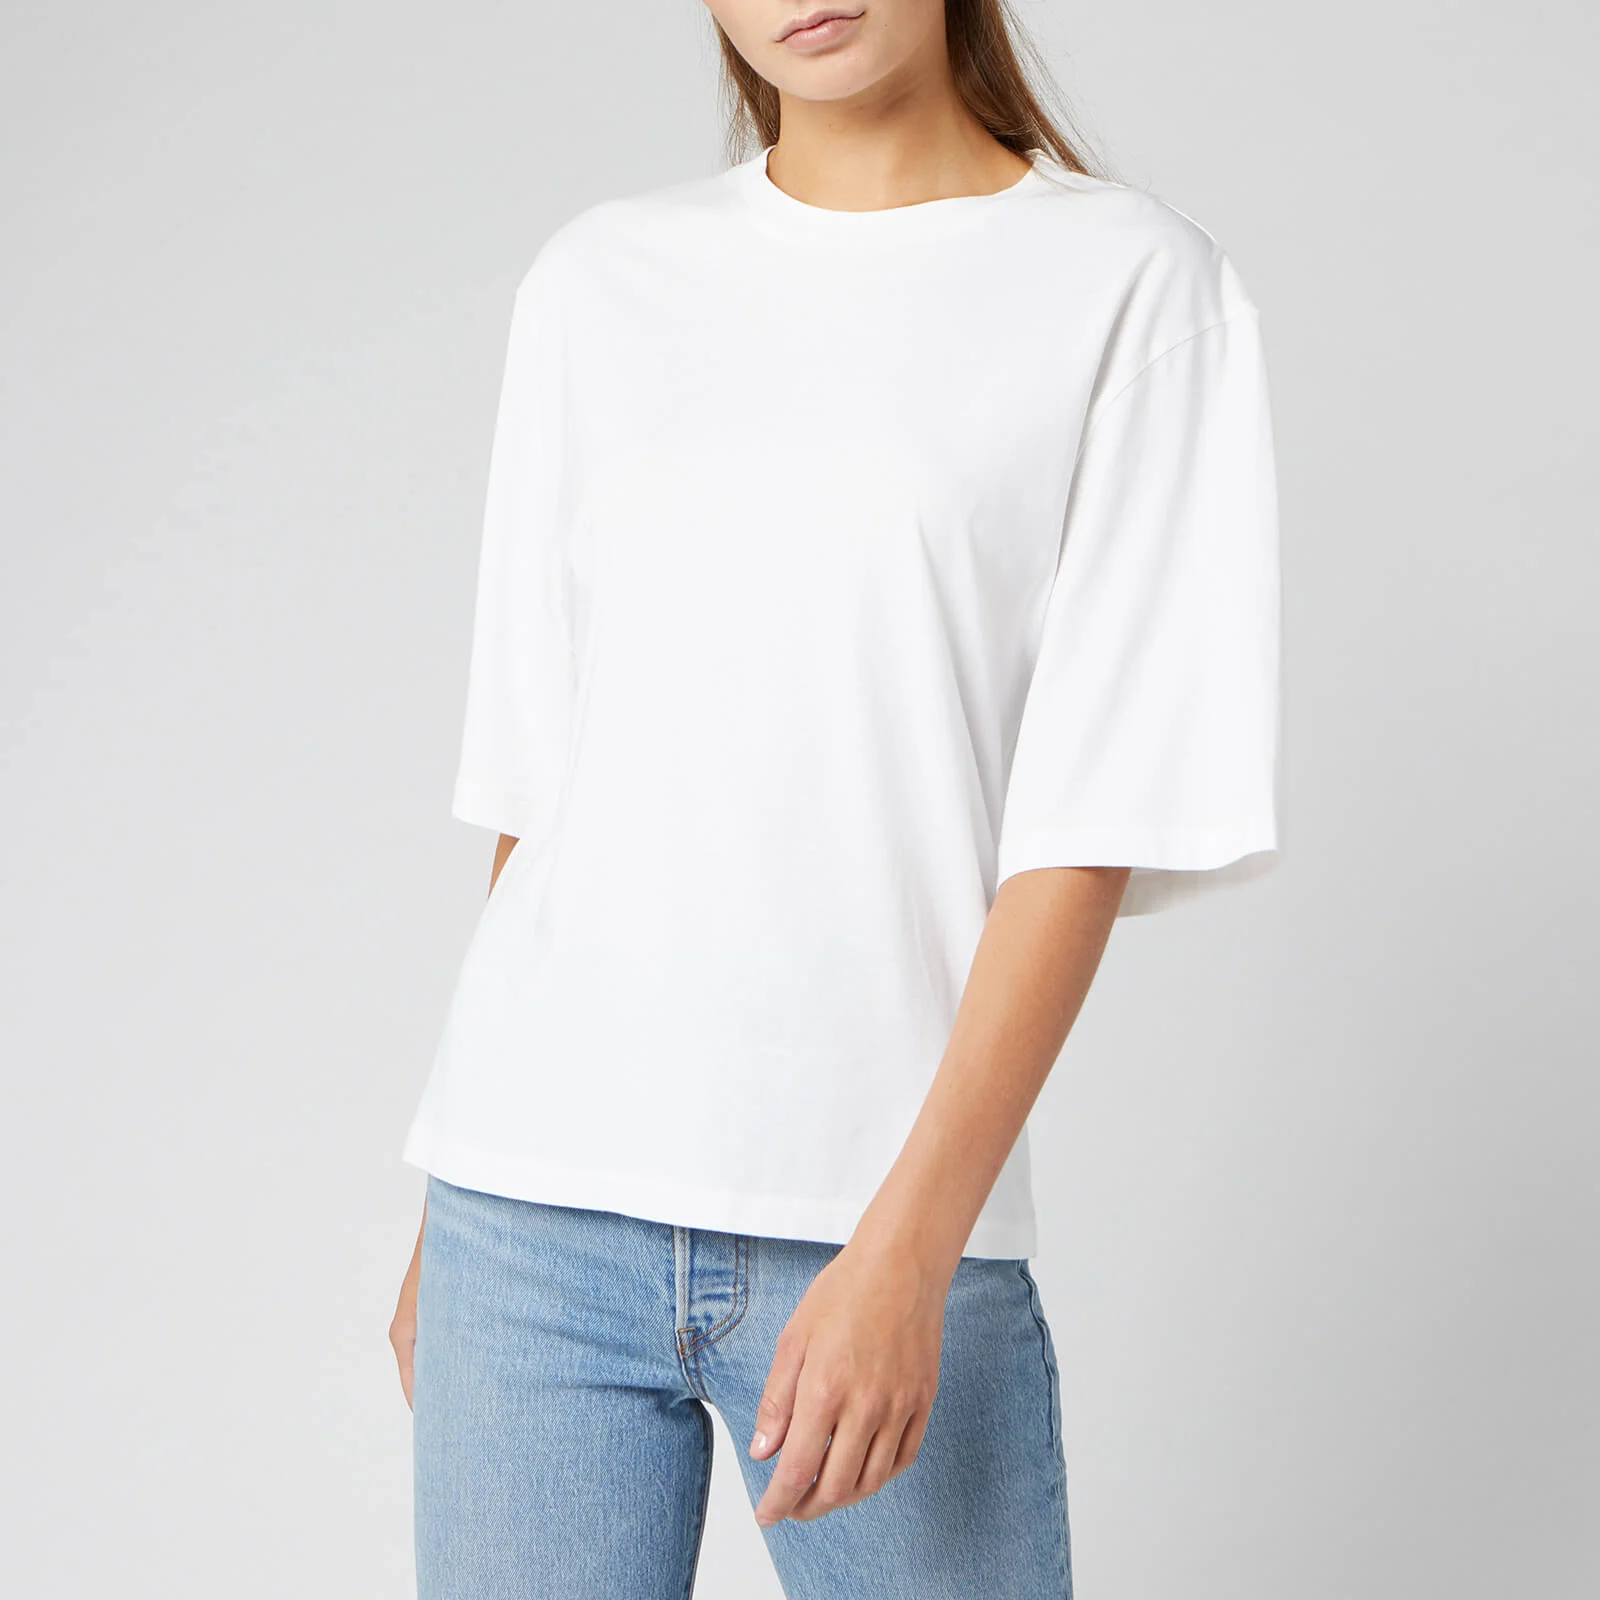 Levi's Women's Made and Crafted Oversized Sleeve T-Shirt - Bright White Image 1